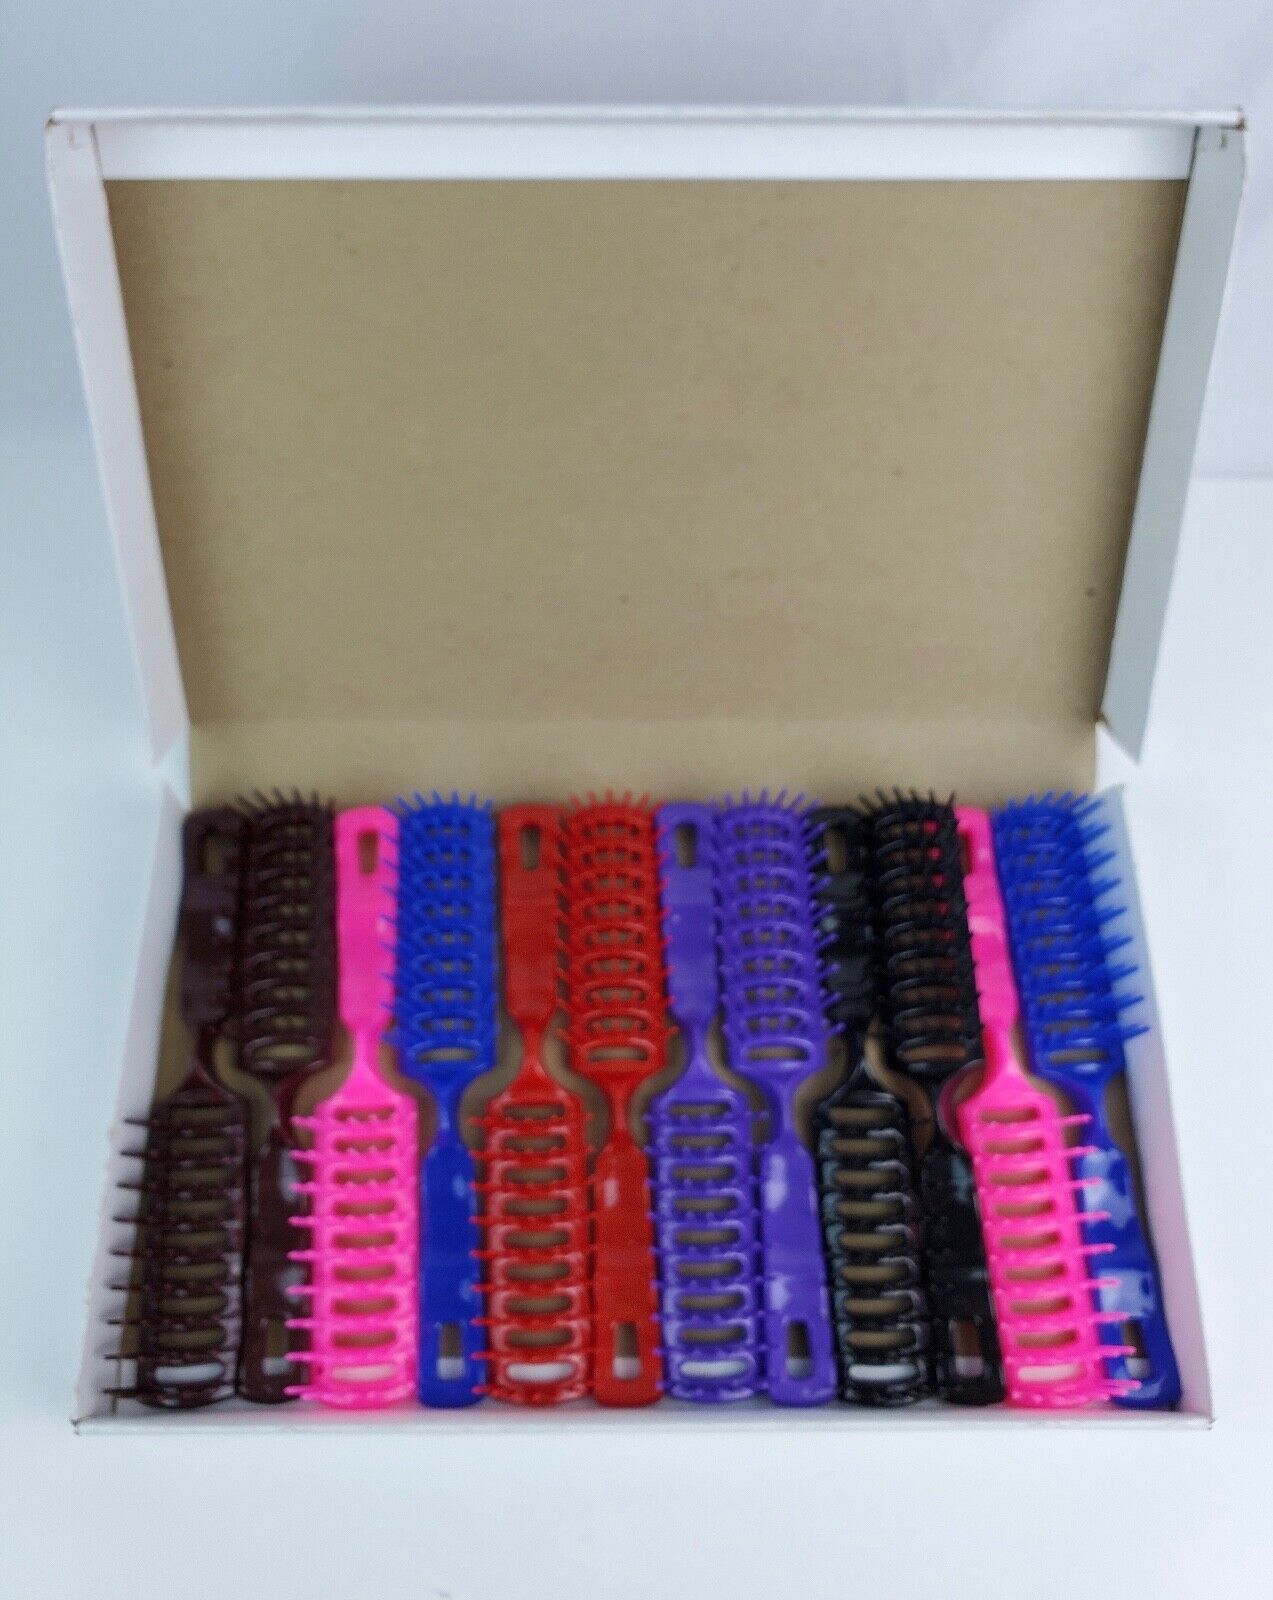 Primary image for NOS Jet-Flow Turbo vented plastic hair brush full case of 12 Colorful Pink Blue